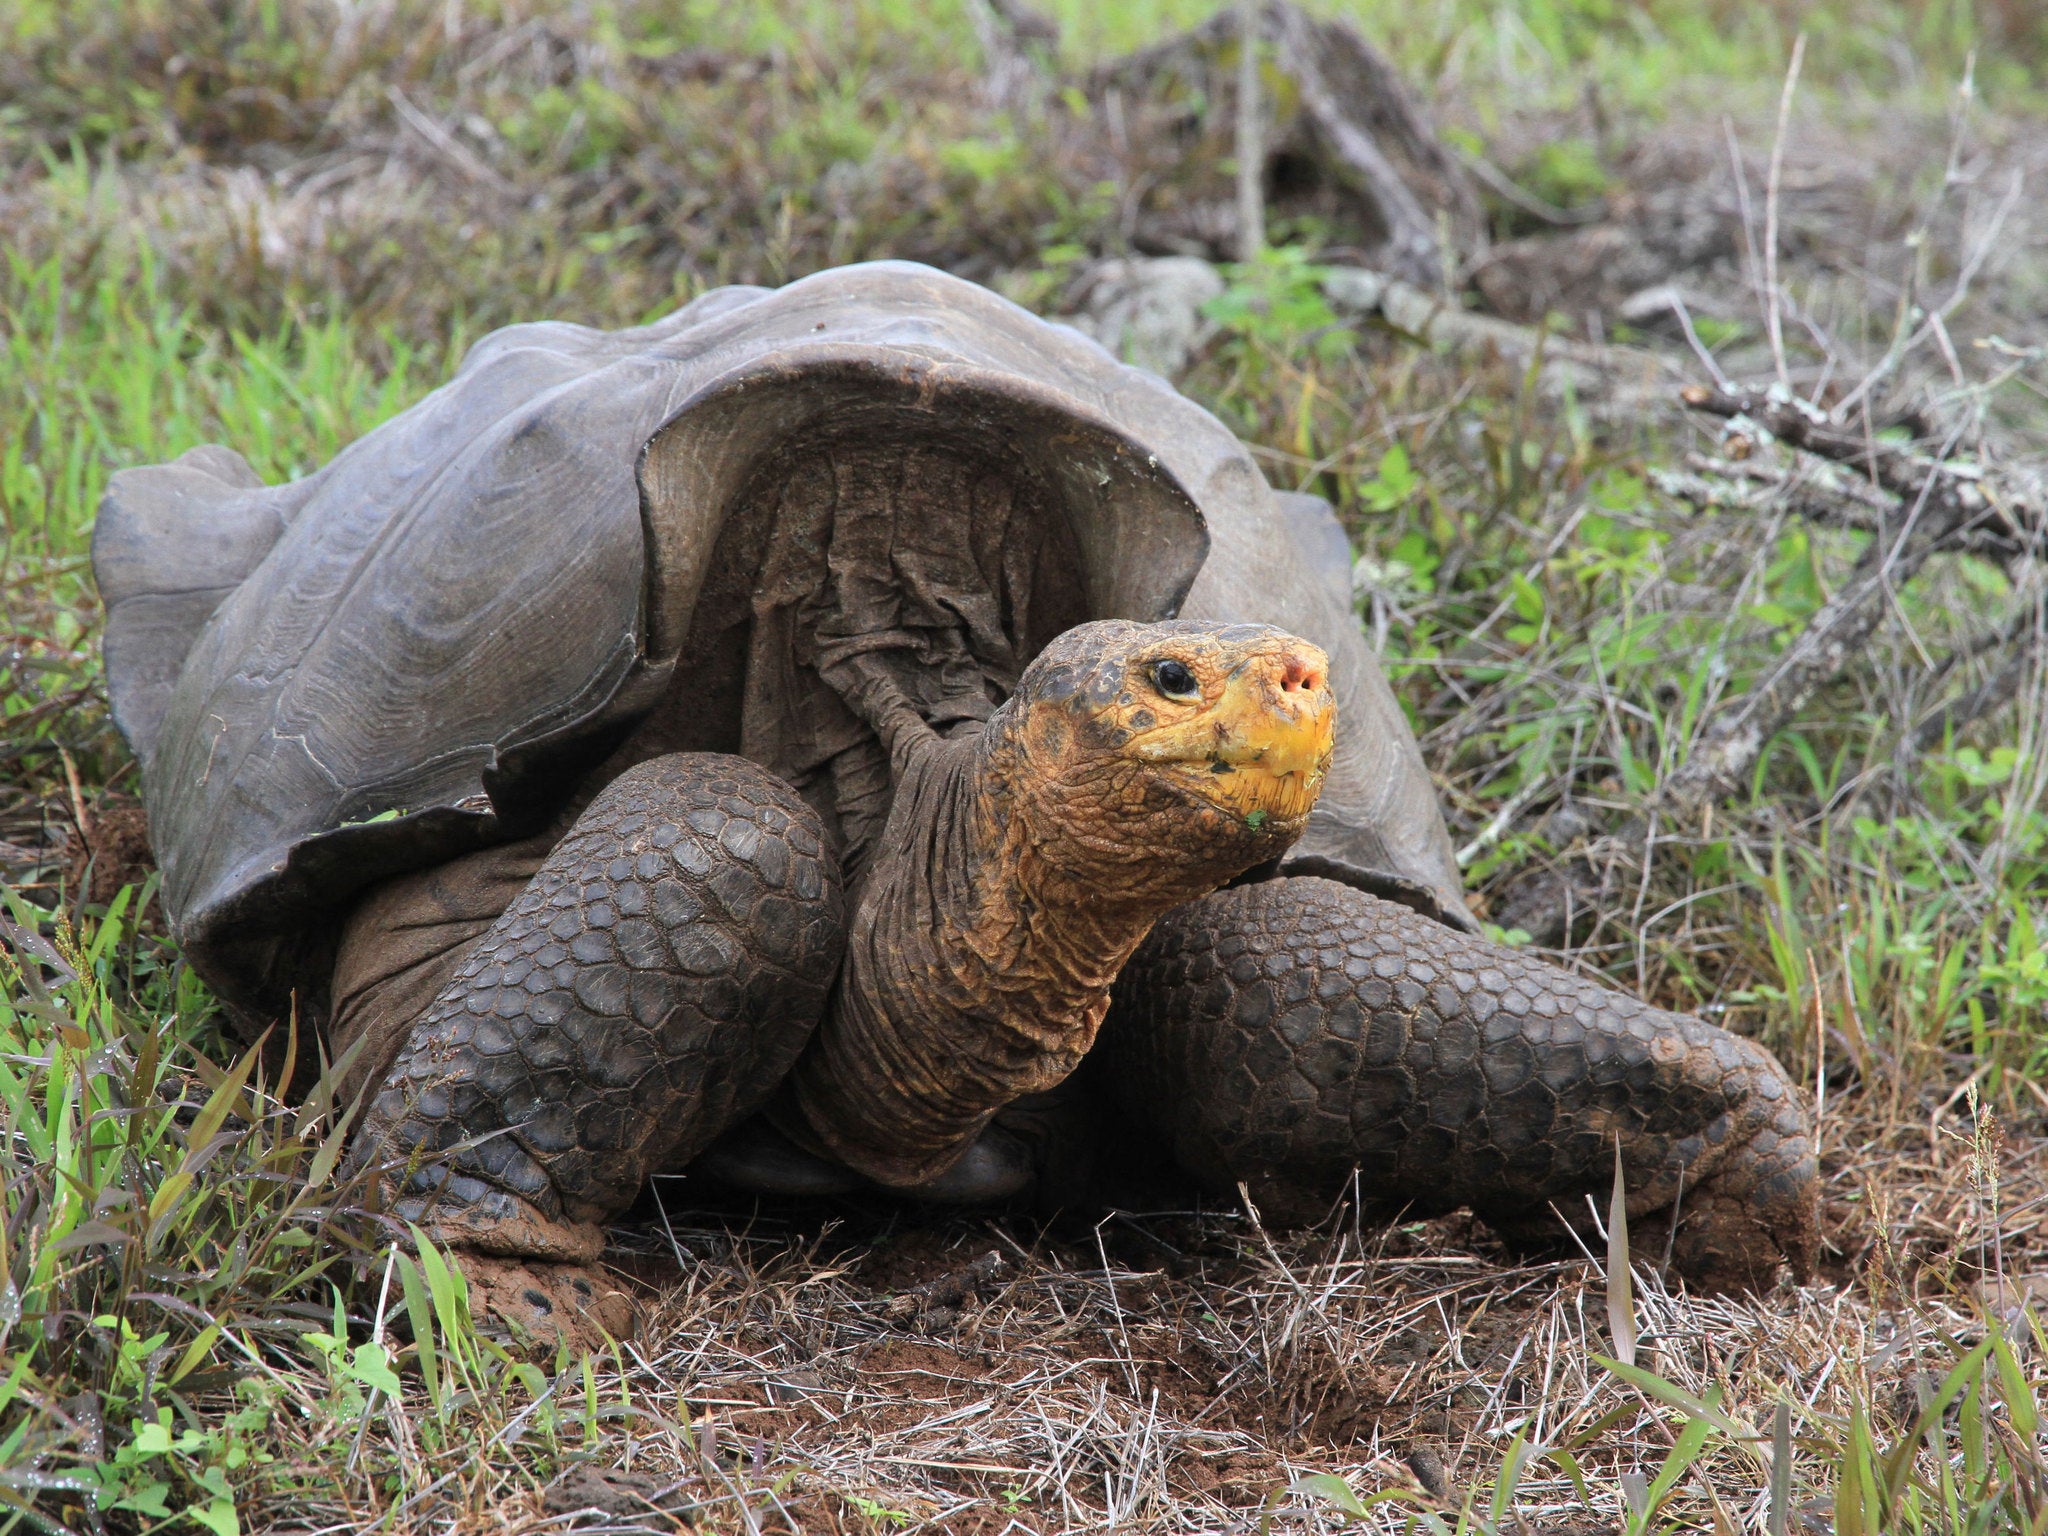 15 giant Galápagos tortoises found slaughtered